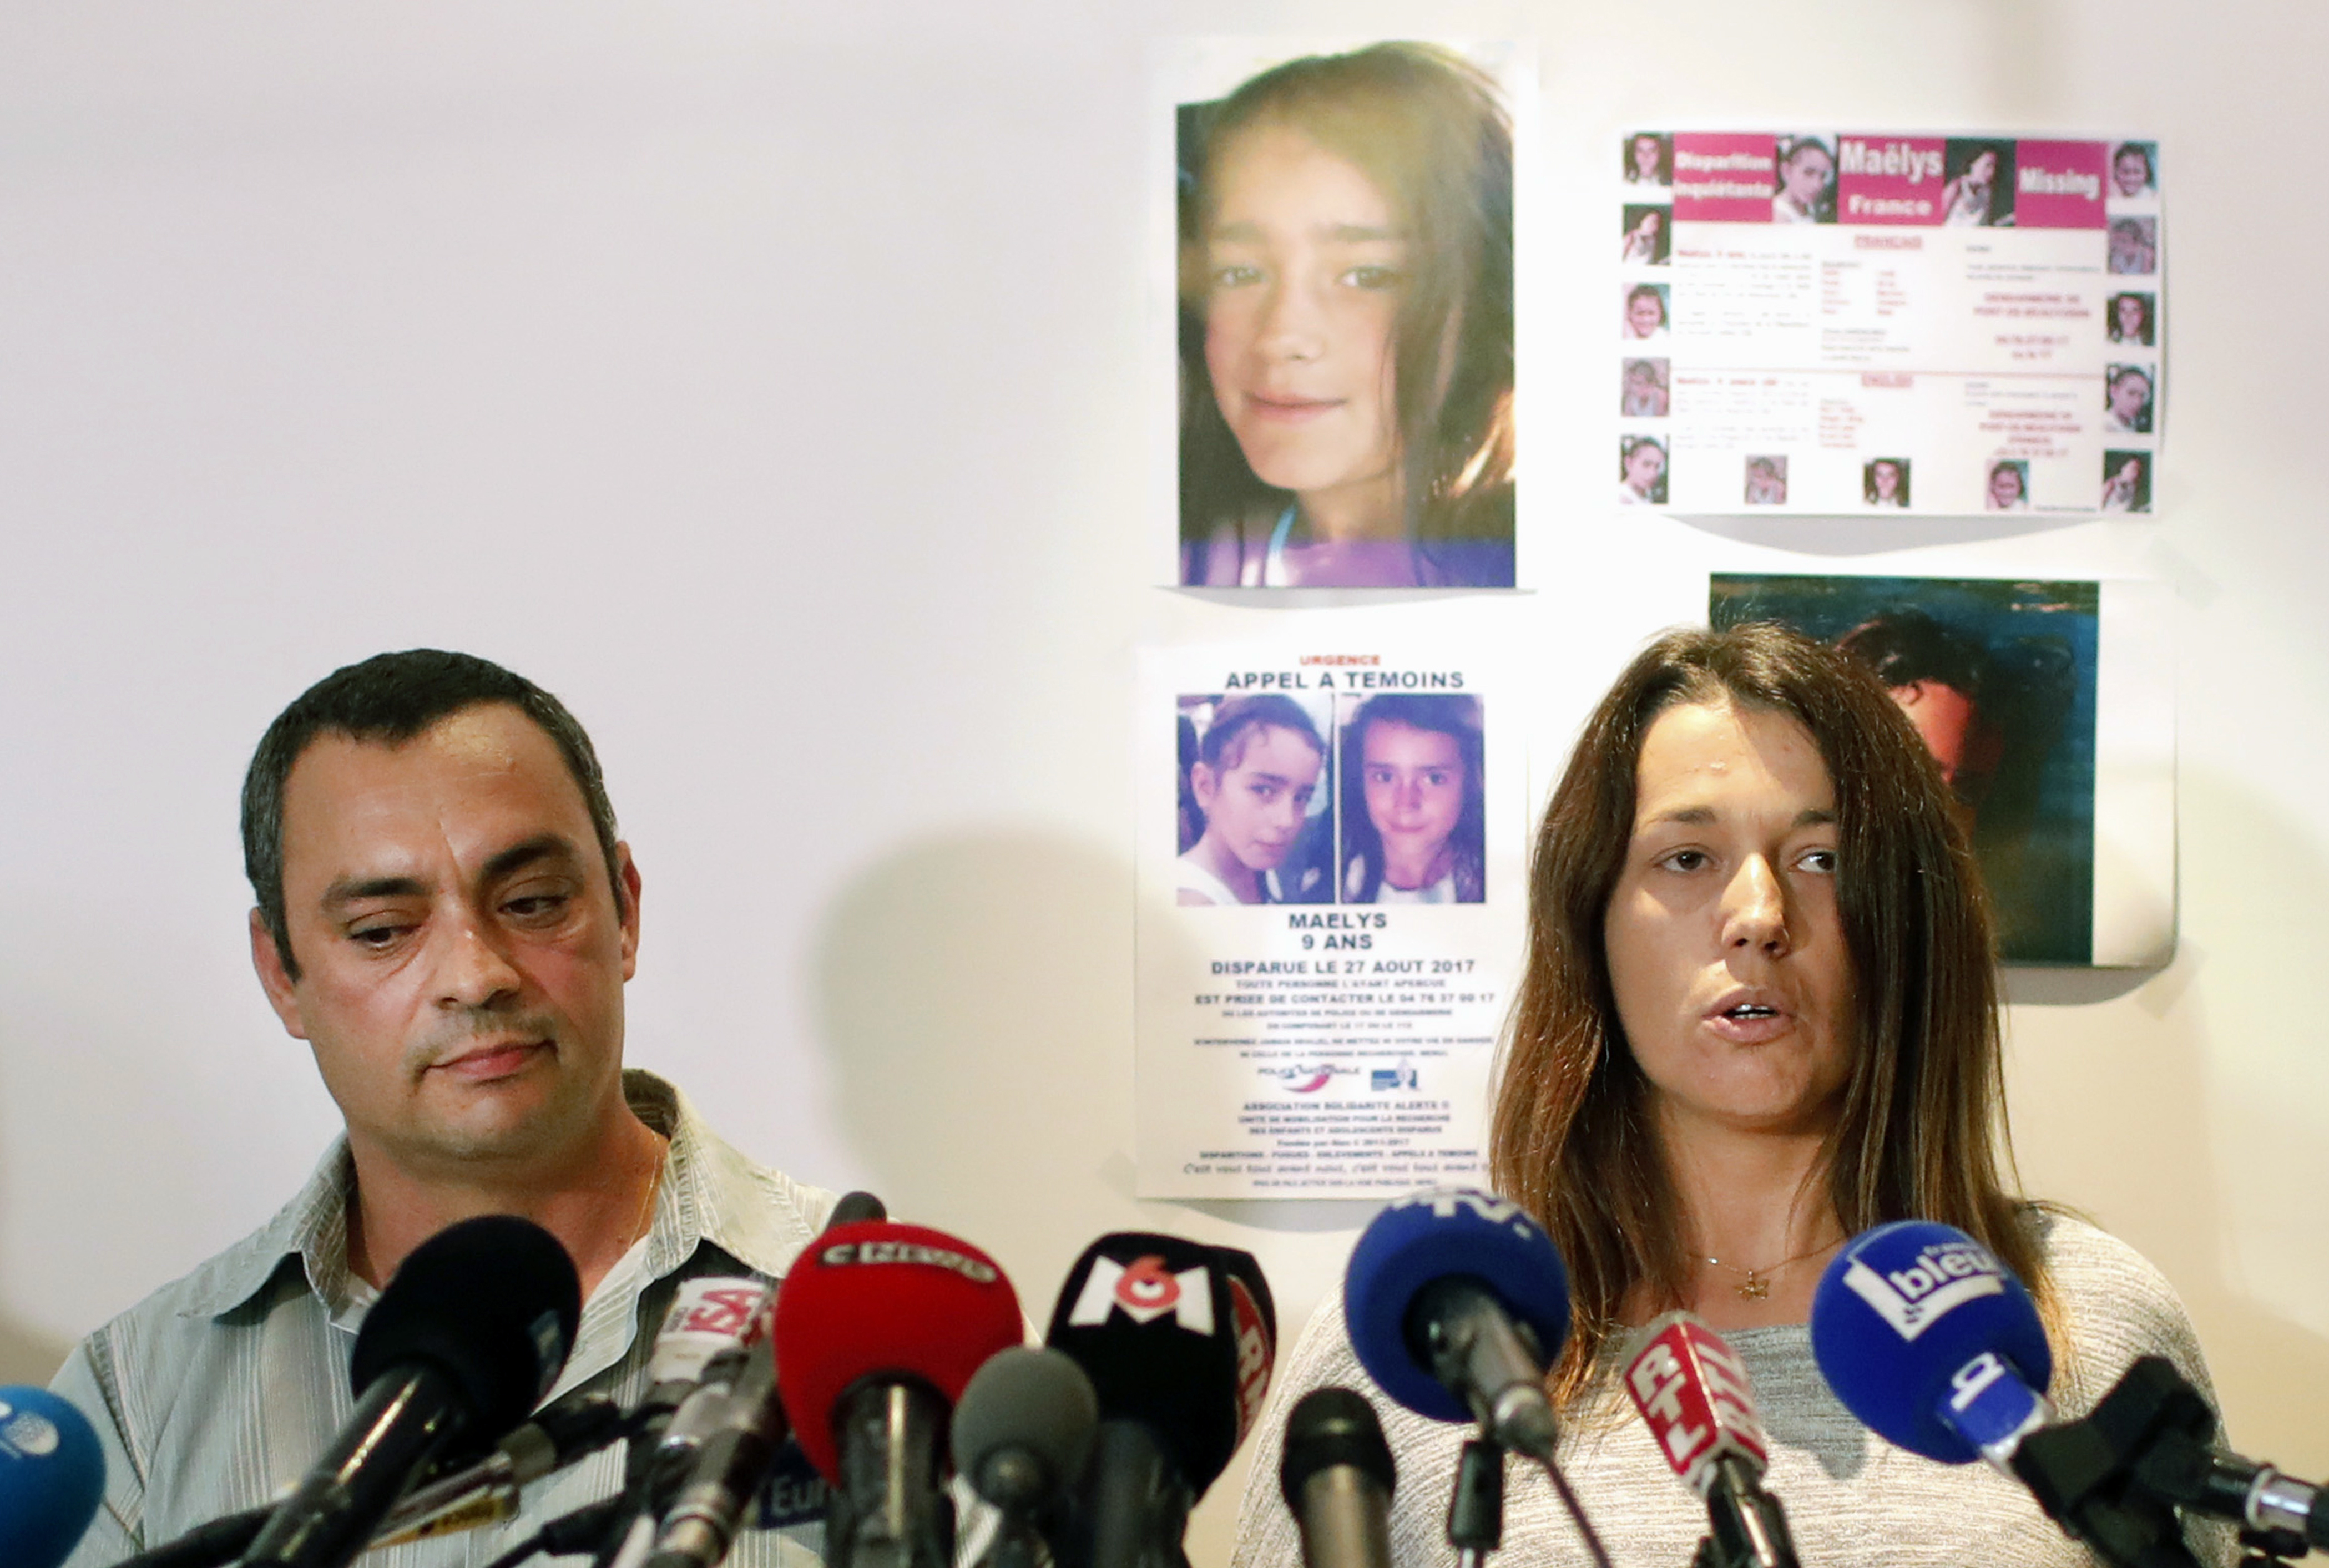 The father of Maelys, Joachim de Araujo, left, and his wife Jennifer at a press conference in Lyon after her disappearance (Laurent Cipriani/AP)